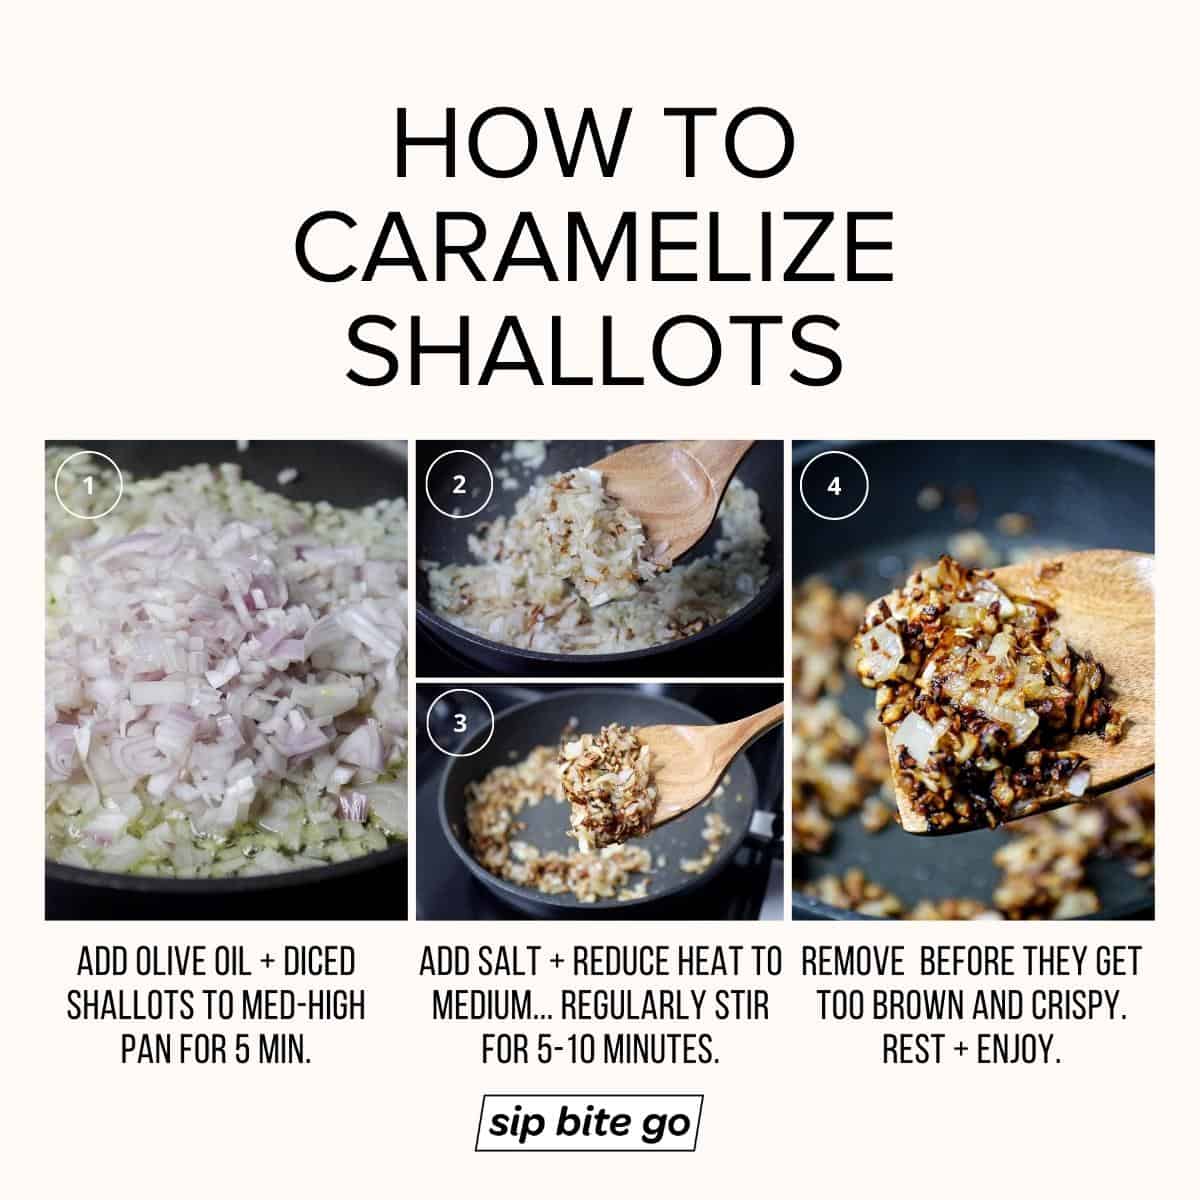 Infographic demonstrating how to caramelize shallots step by step